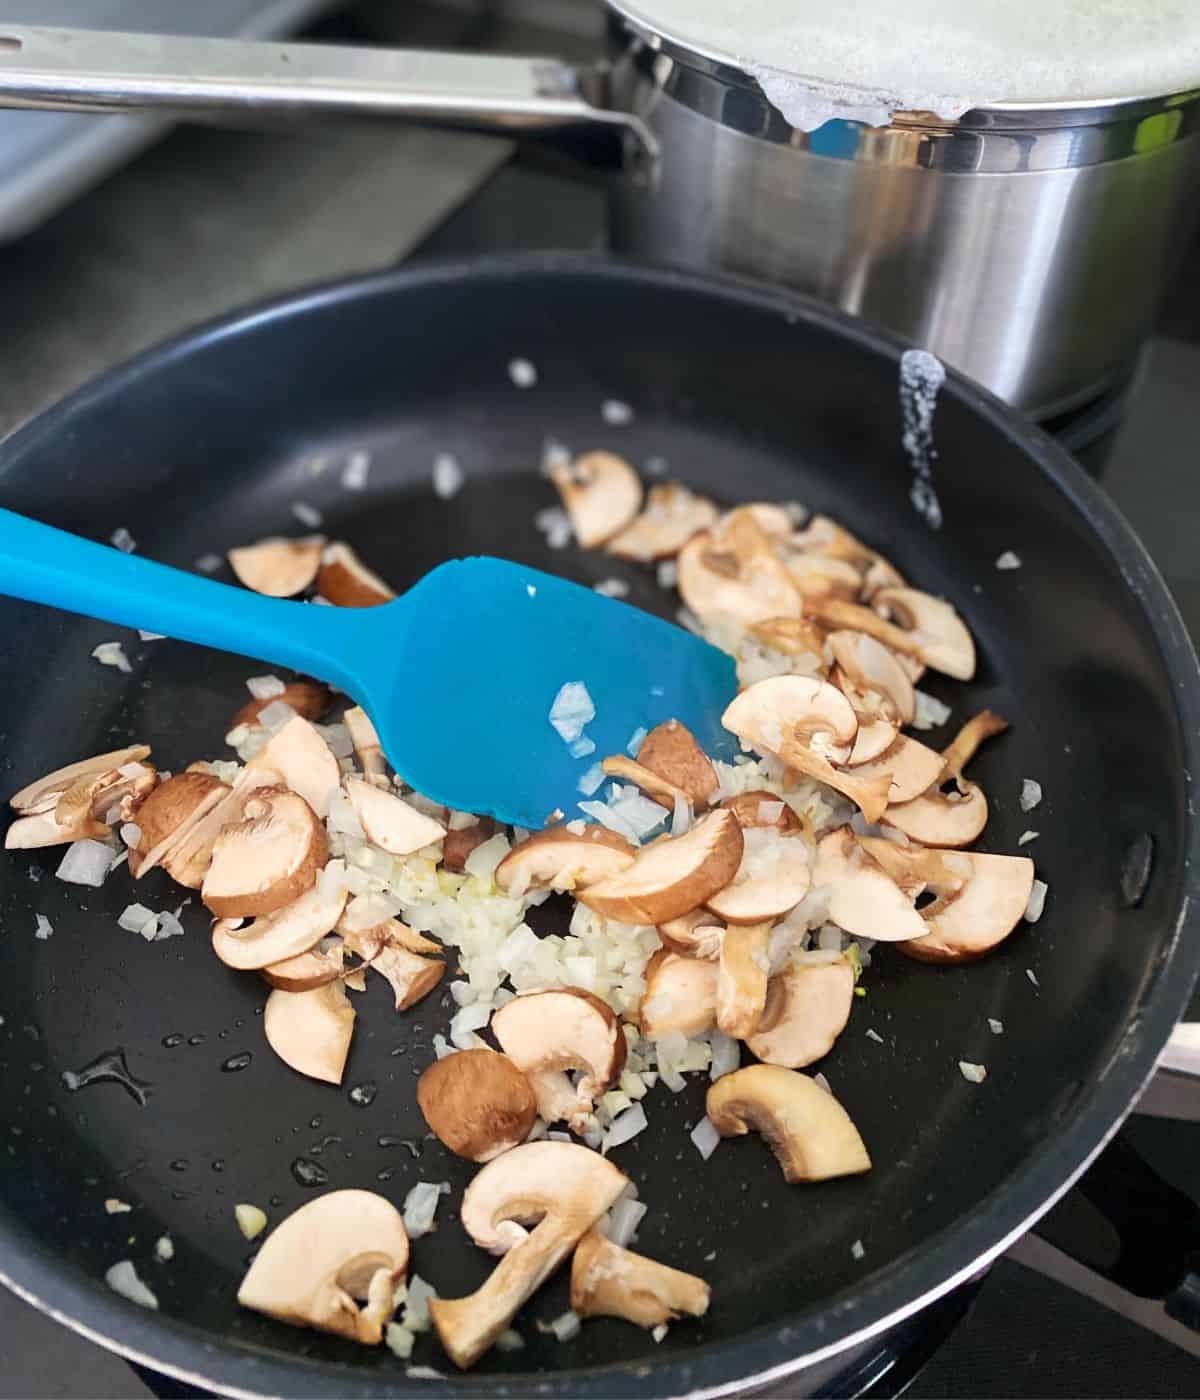 Mushrooms, onion and garlic being stirred in a frying pan.